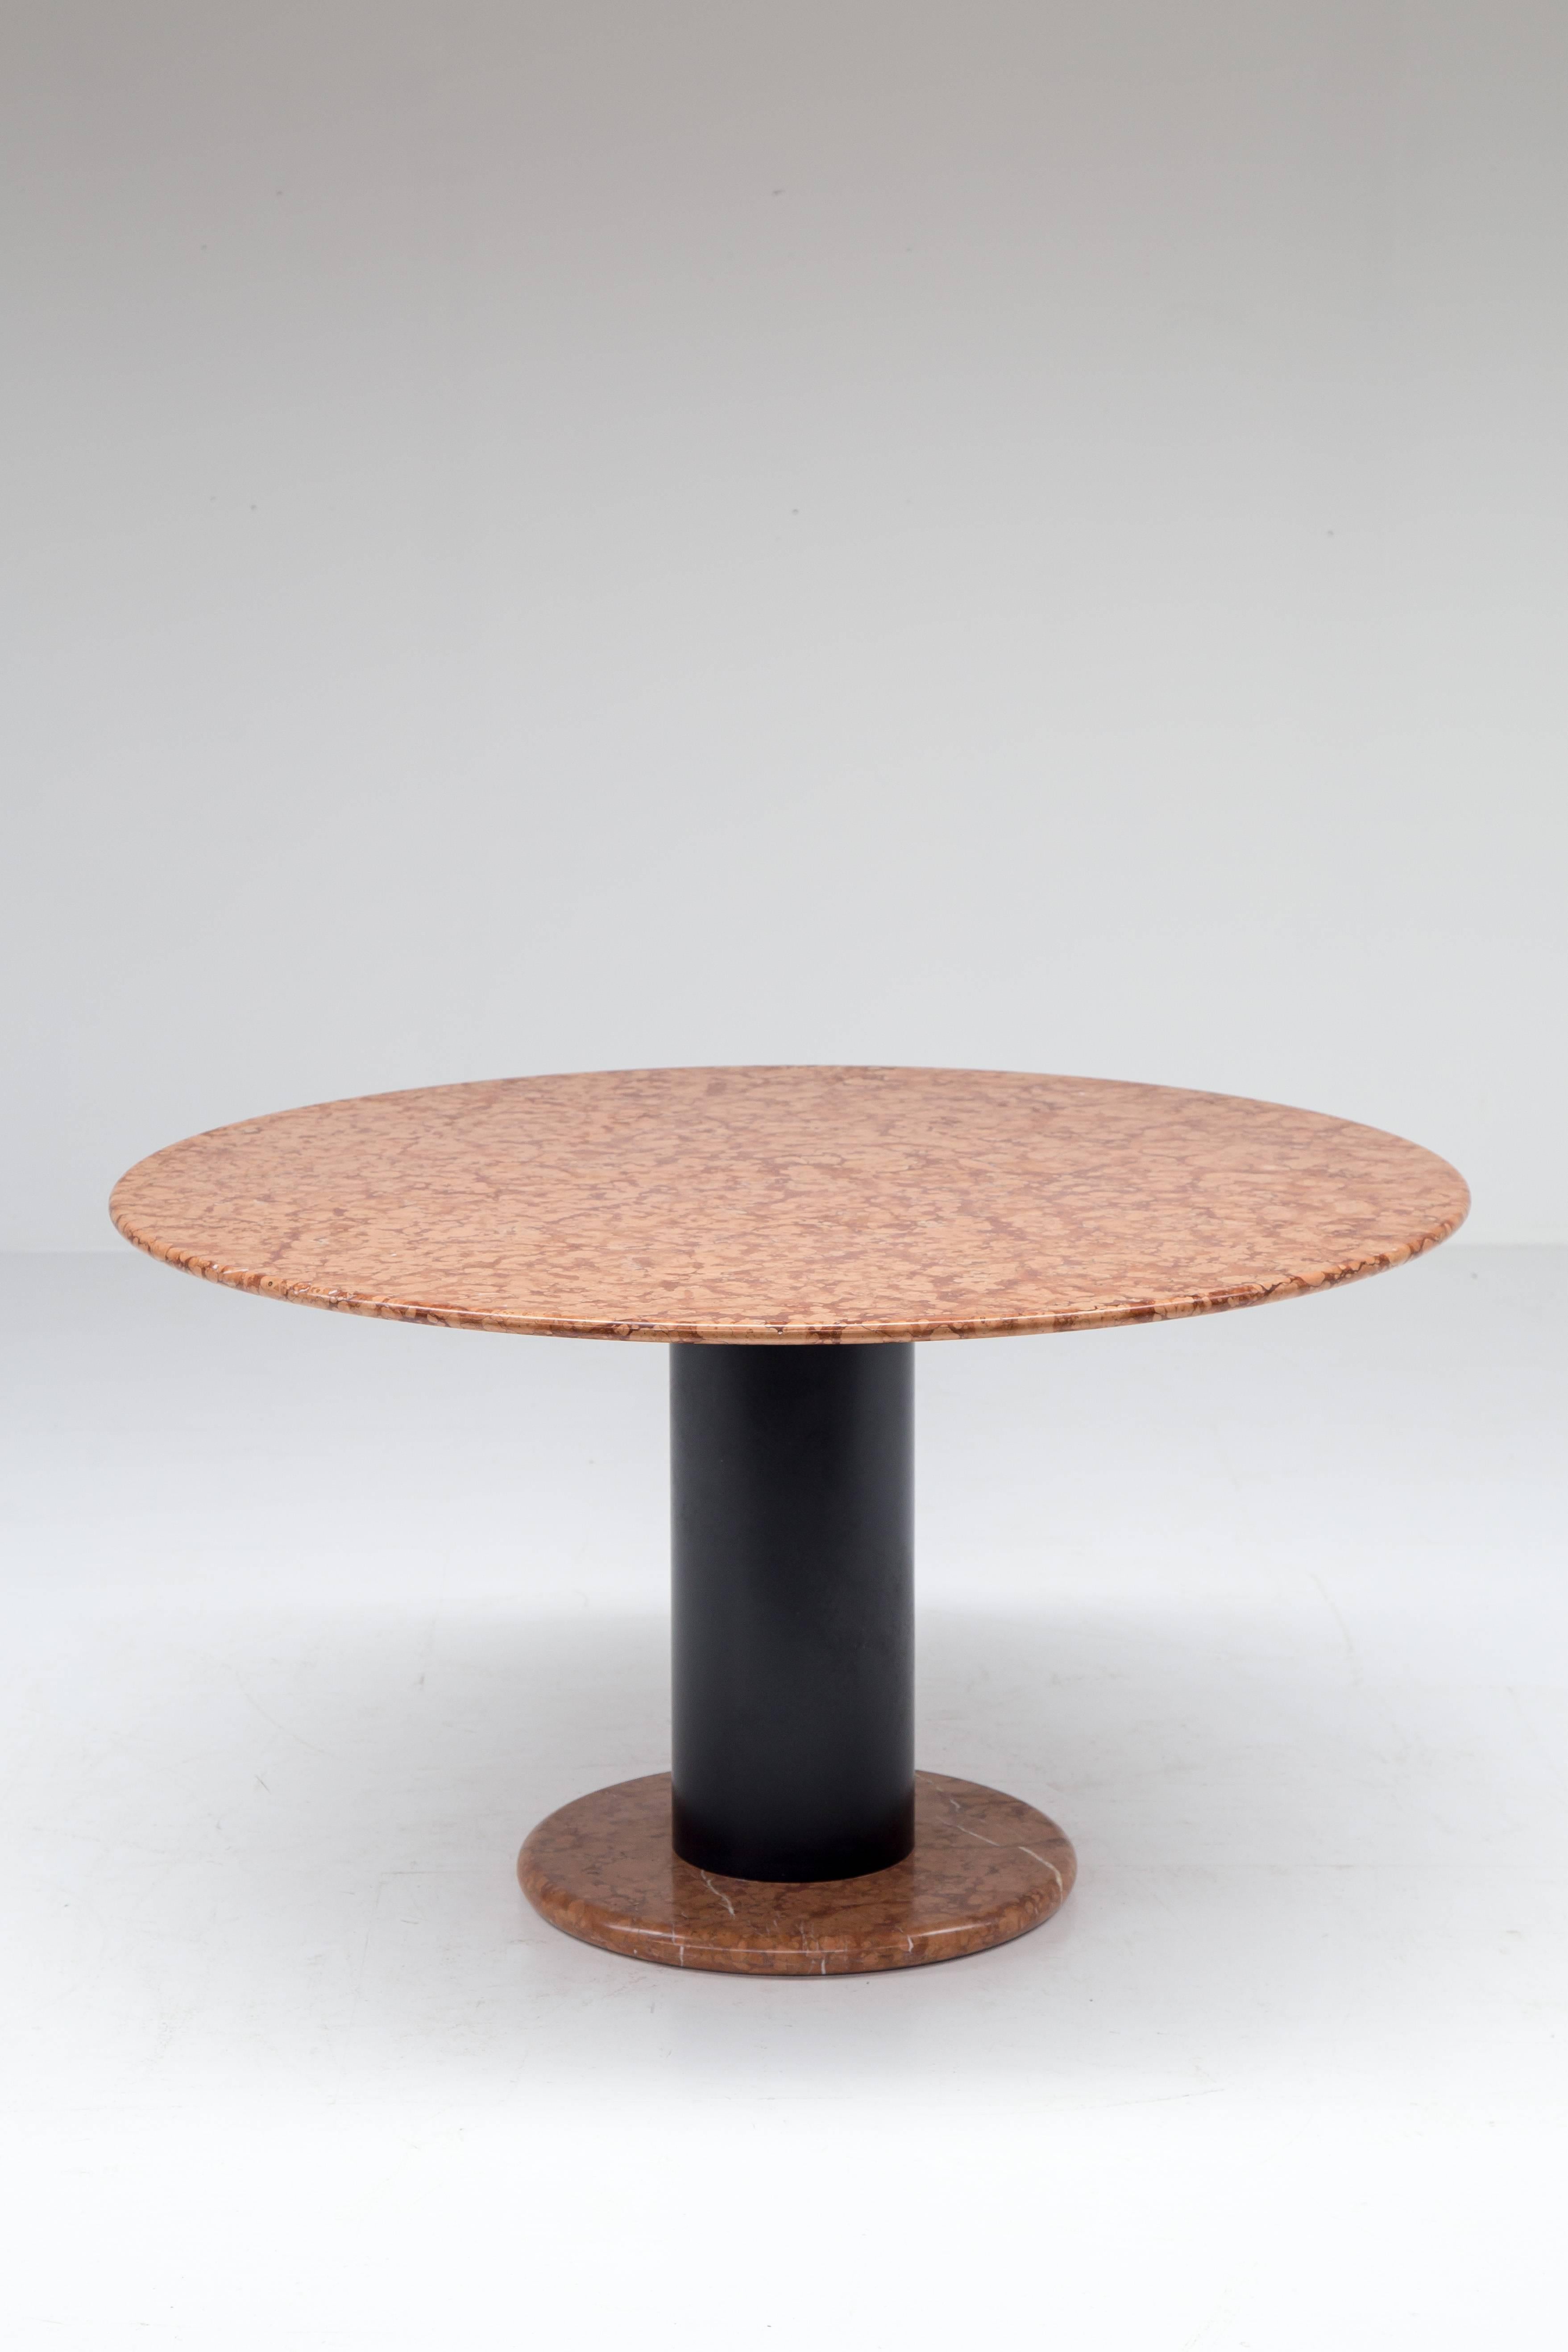 Mid-Century Modern Ettore Sottsass Marble Dining Table for Poltronova, Italy, 1965